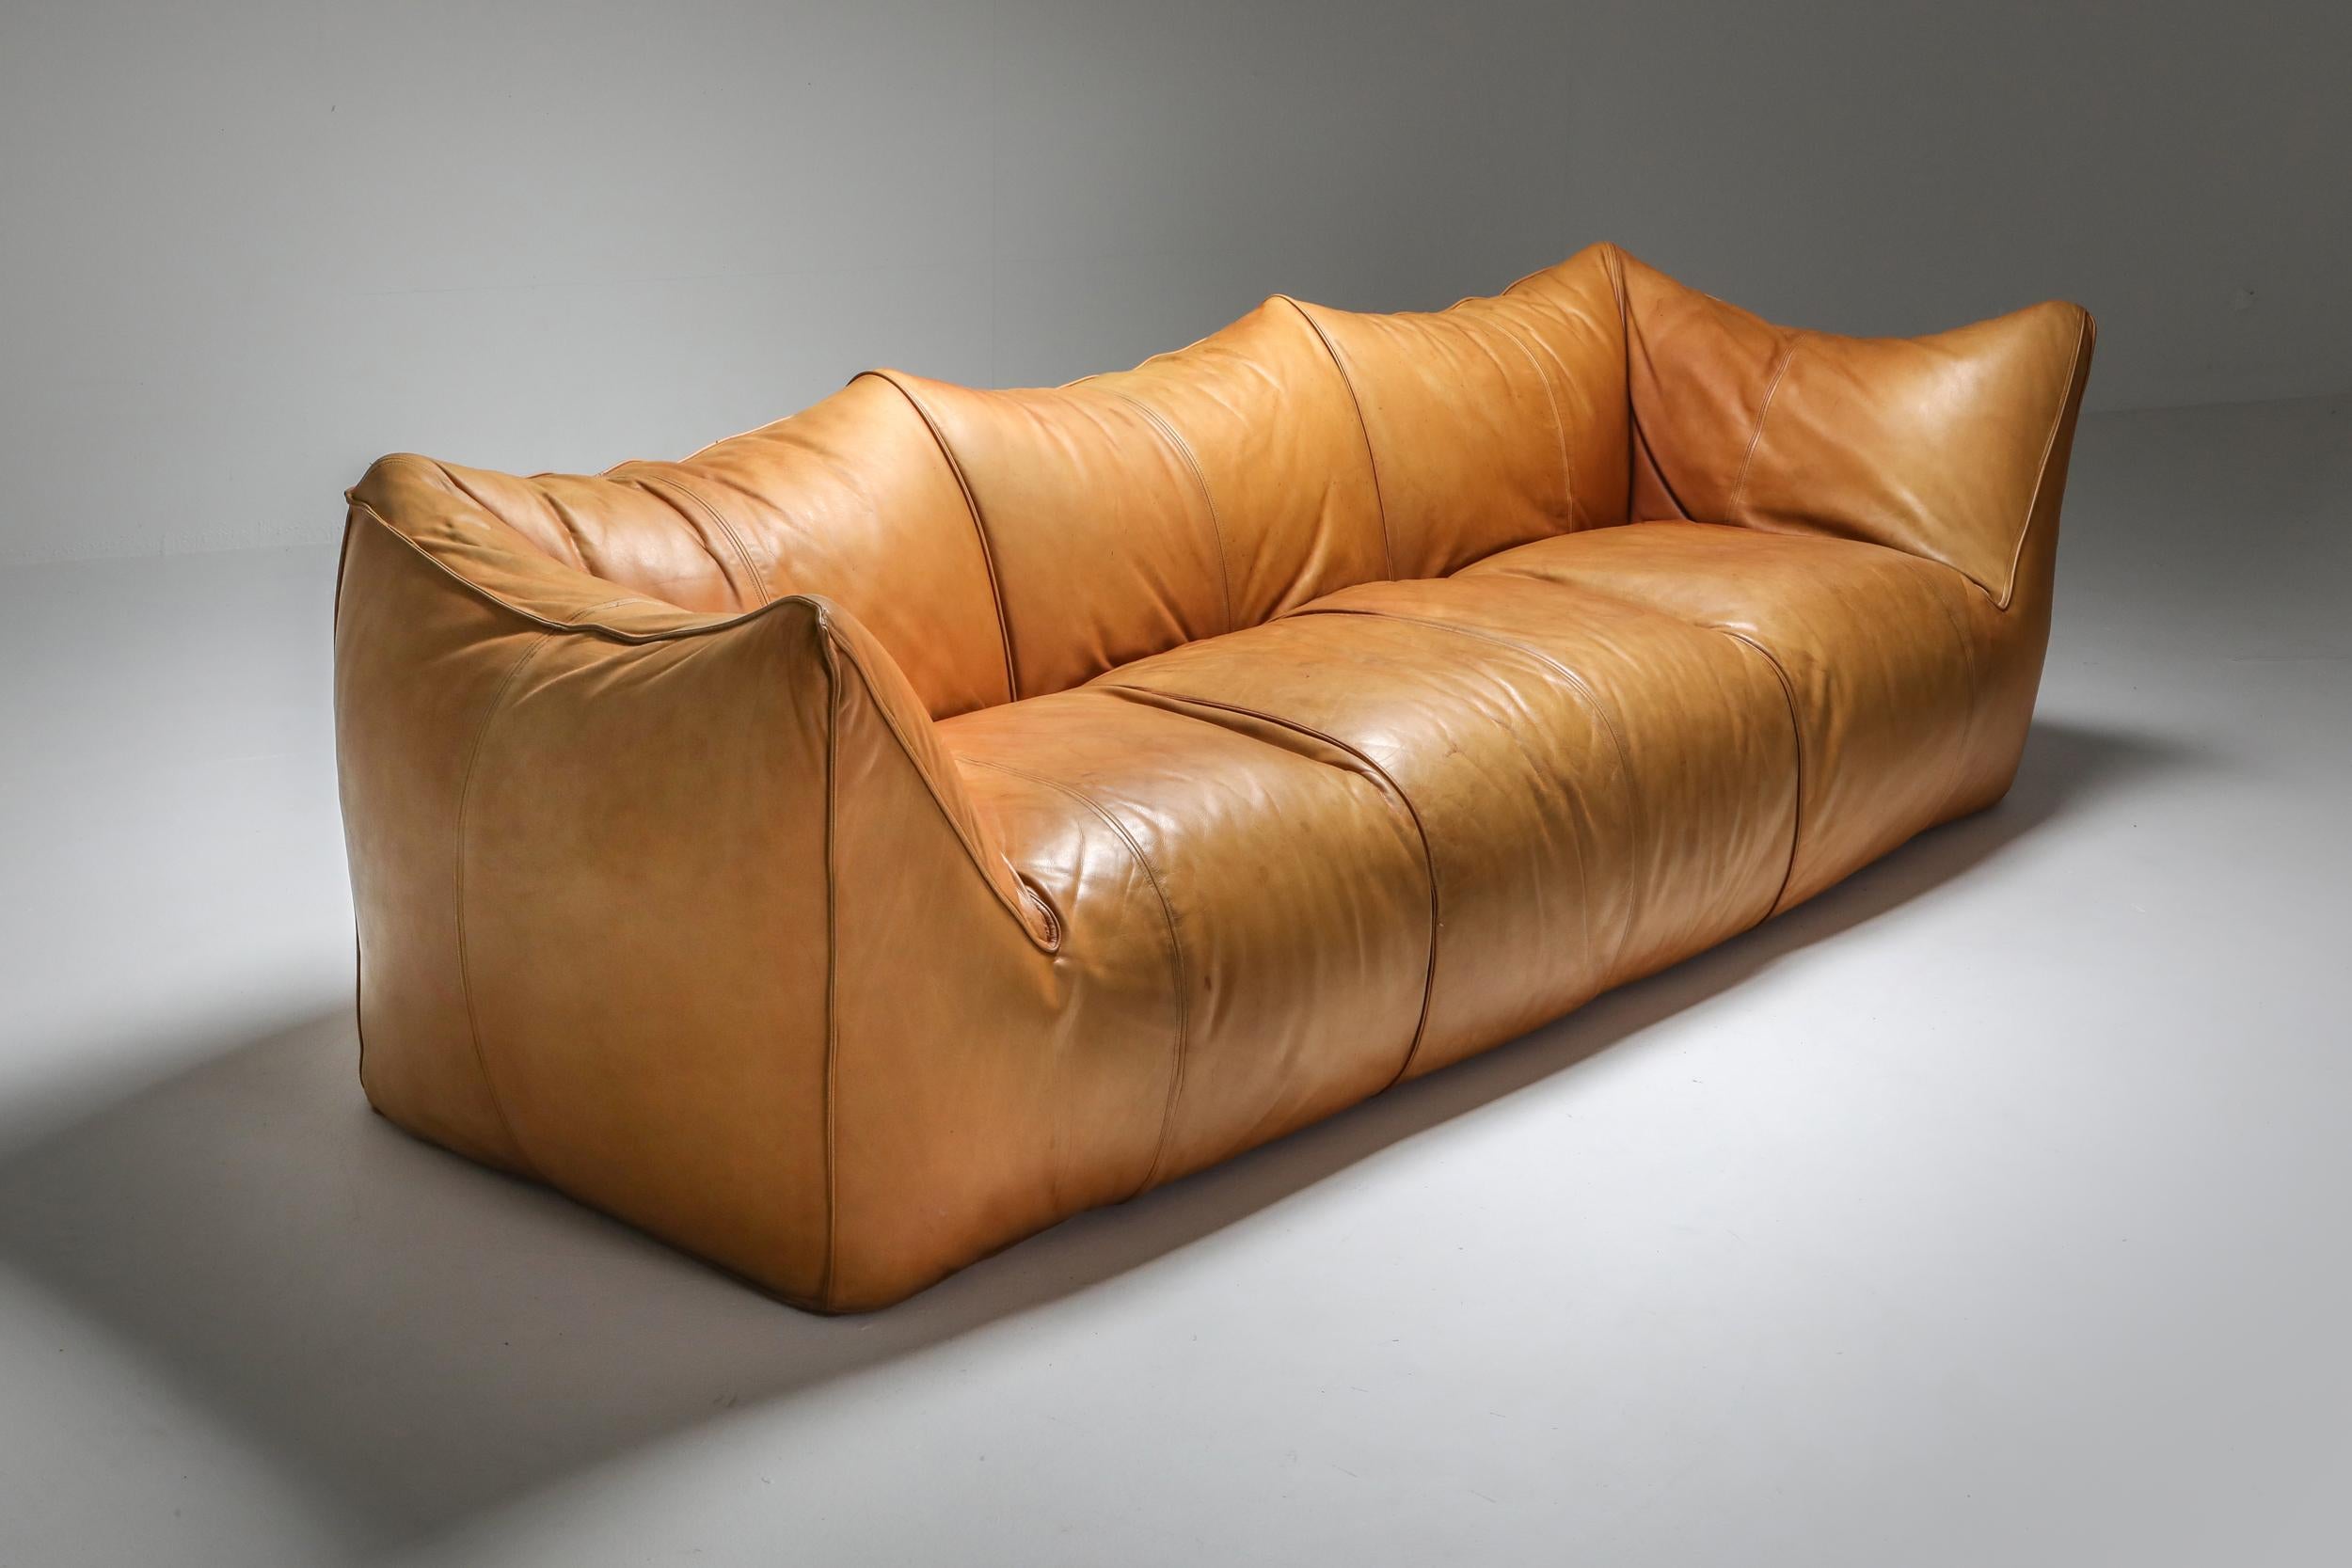 'Le Bambole' by Mario Bellini, Italy, 1970s, cognac tan leather

The starting point was a shopping bag that contained formless material that was shaped when the bag was set on the ground and squashed. In the shared research undertaken by the